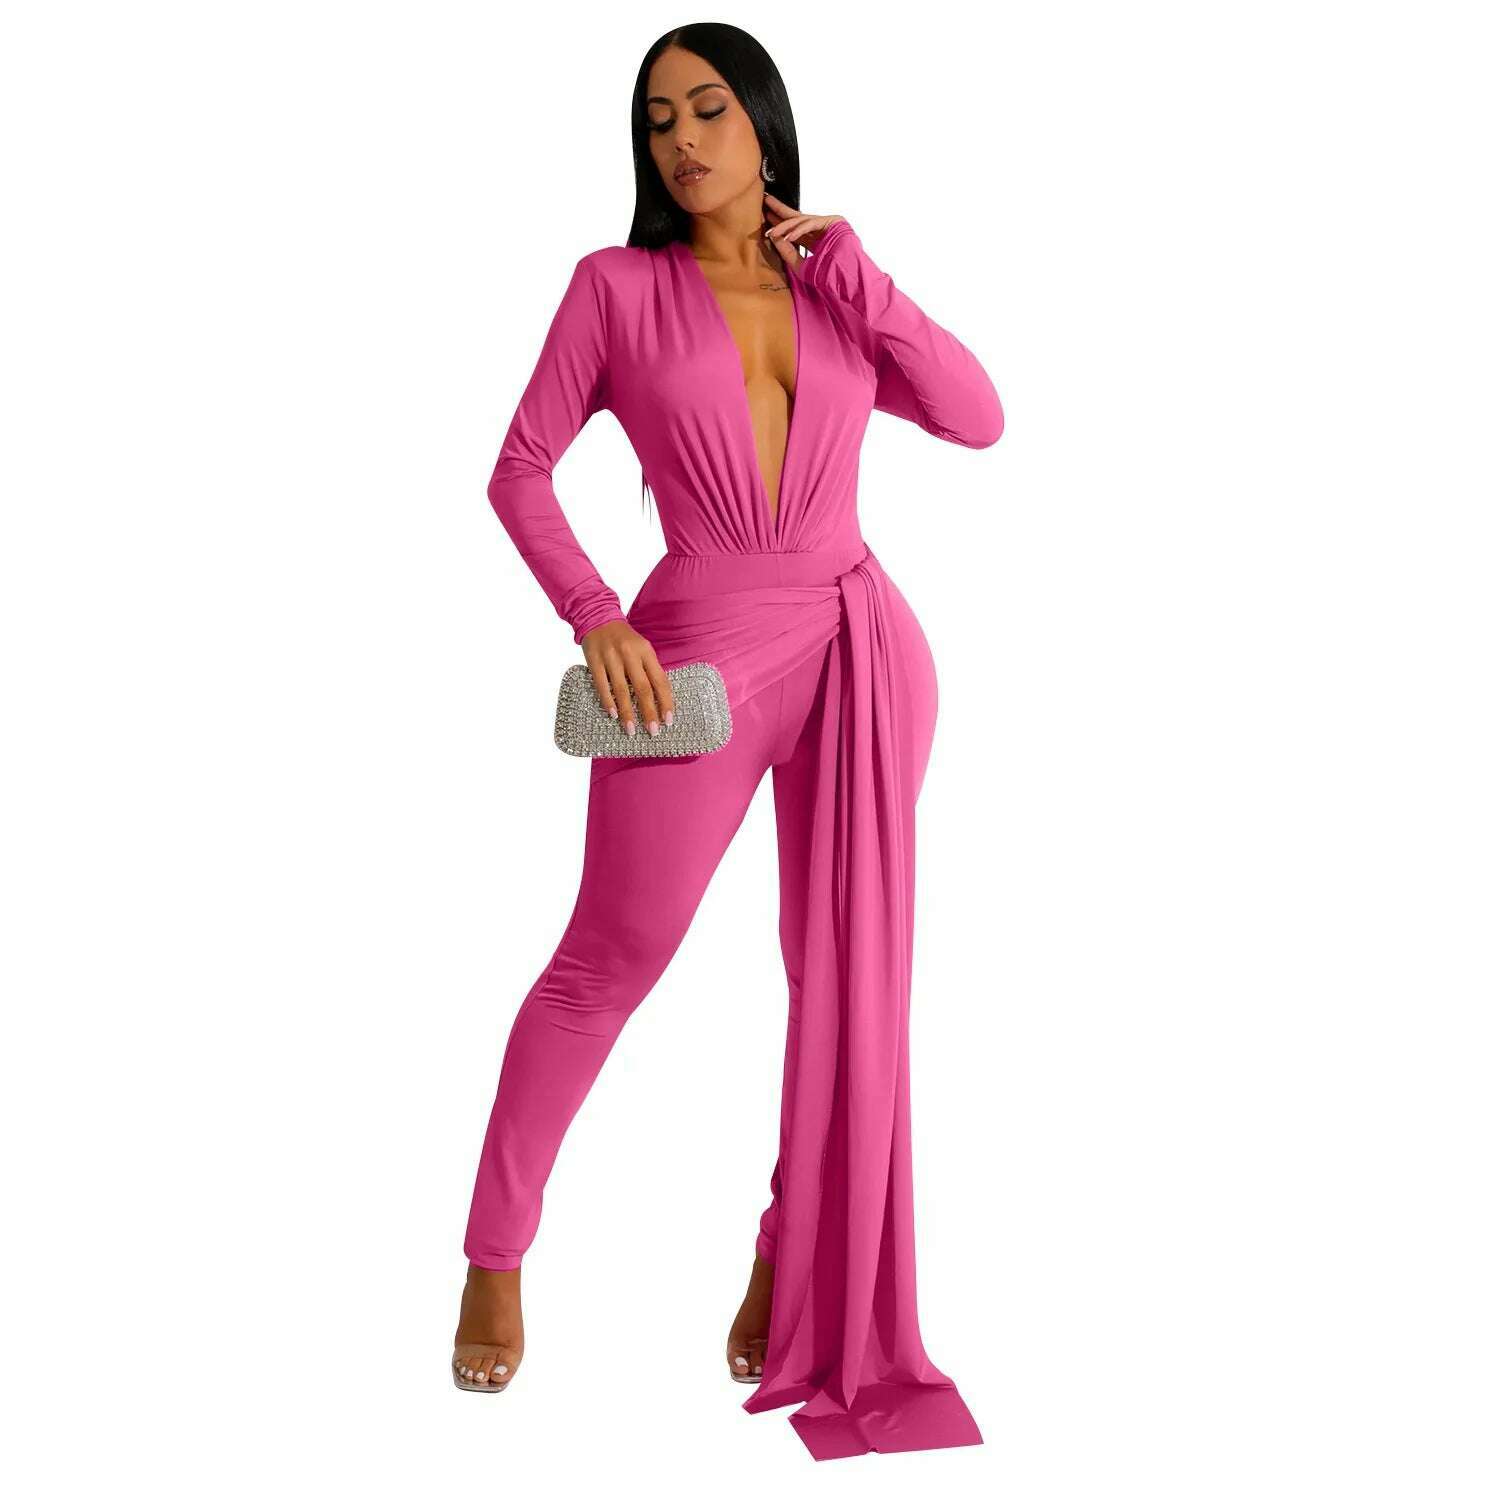 KIMLUD, Elegant Ribbon Bodycon Jumpsuits Sexy Long Sleeve Lace Up Romper Club Party Summer Women Clothes Overalls Luxury One Piece 2023, rosy / S, KIMLUD Womens Clothes